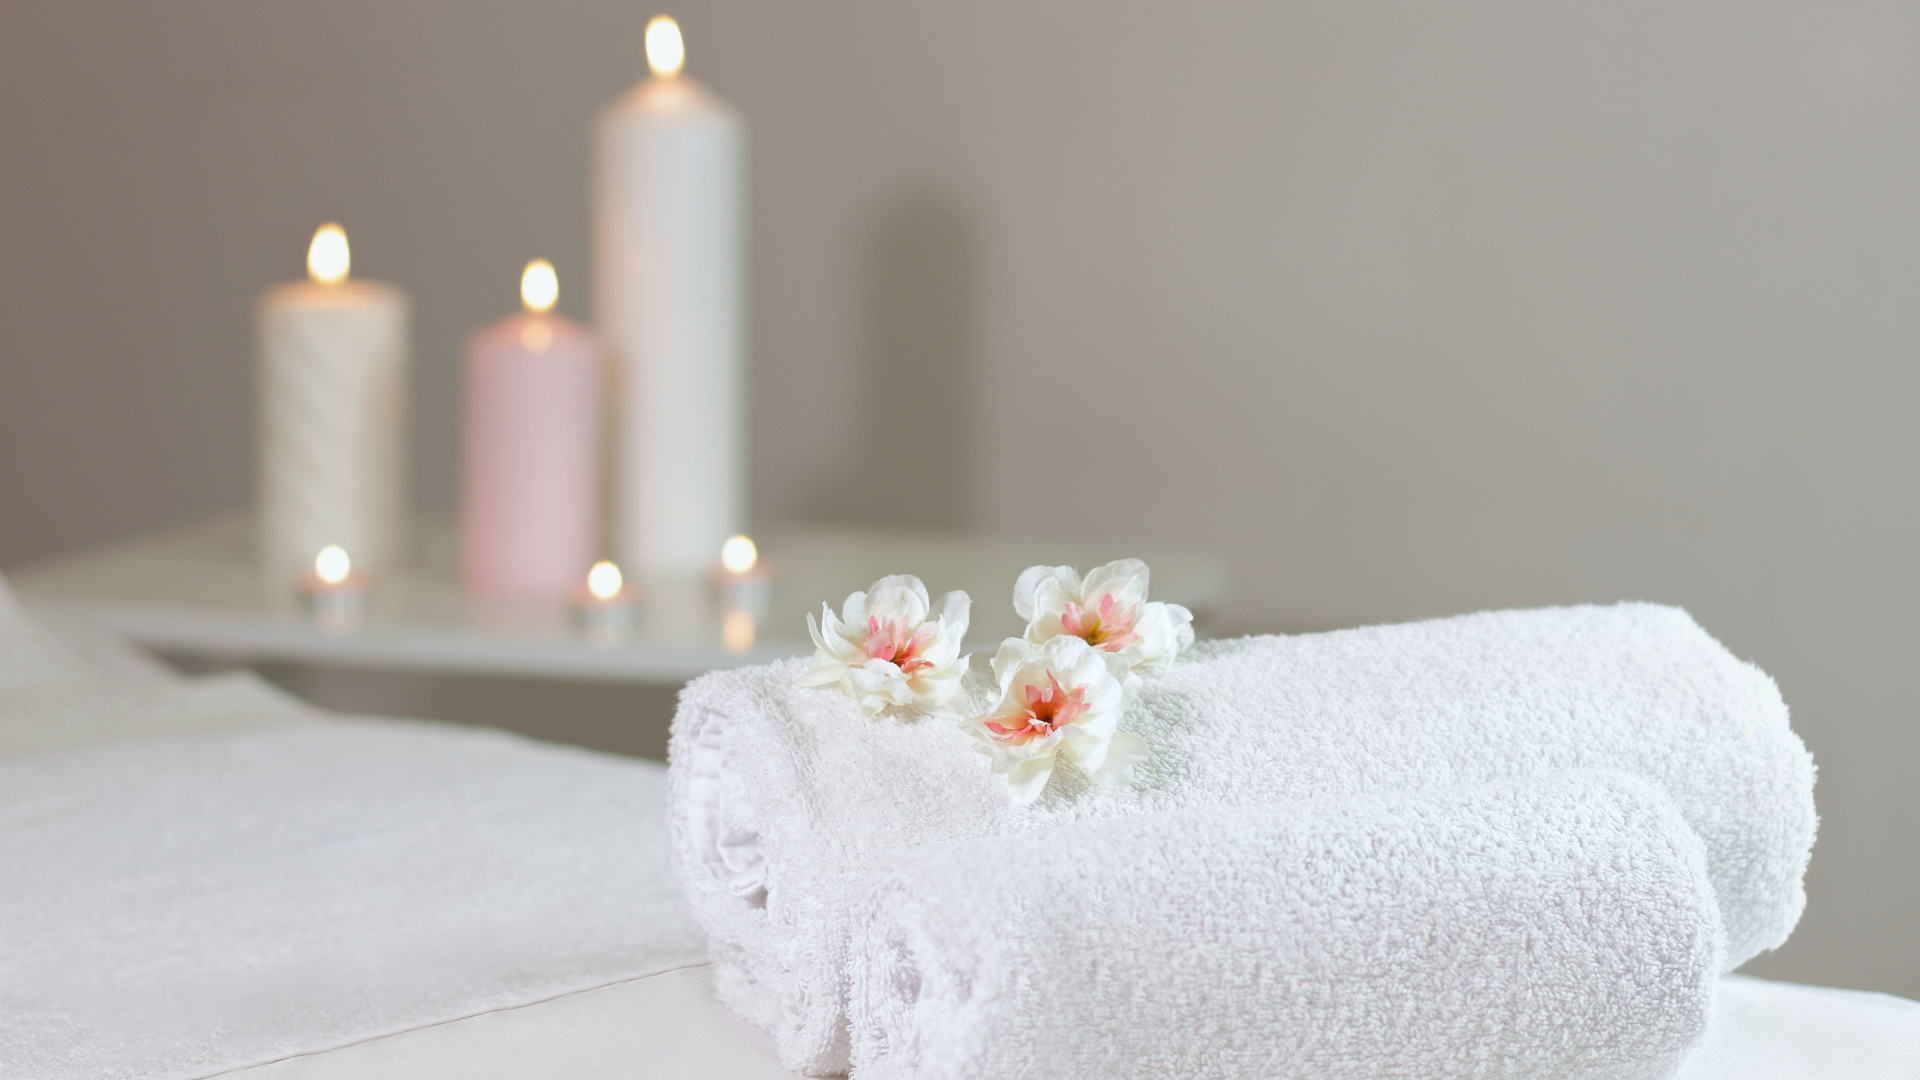 6 Things to Consider Before Booking Your Next Massage